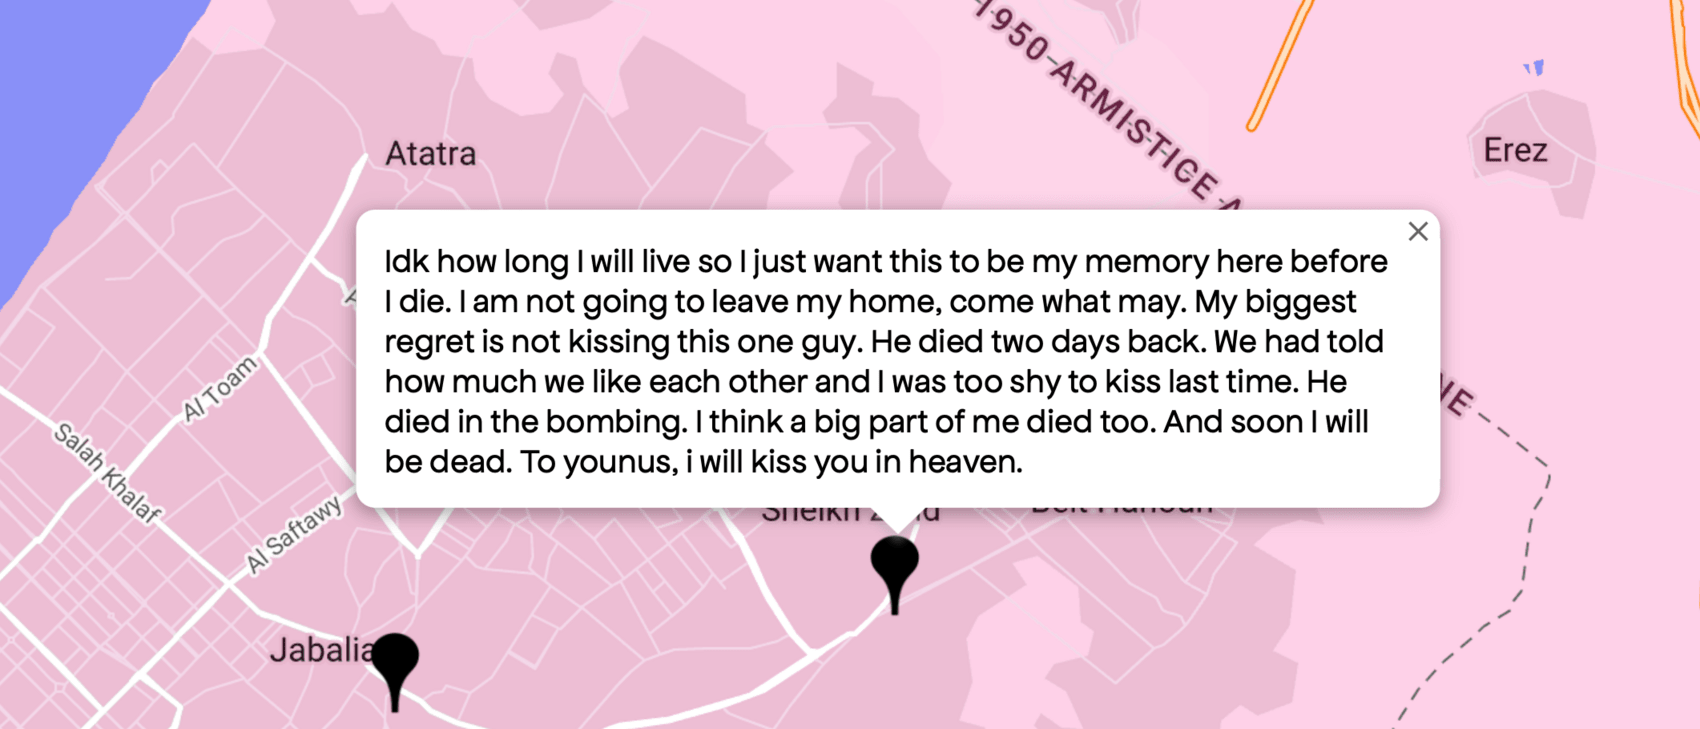 Idk how long I will live so I just want this to be my memory here before I die. I am not going to leave my home, come what may. My biggest regret is not kissing this one guy. He died two days back. We had told how much we like each other and I was too shy to kiss last time. He died in the bombing. I think a big part of me died too. And soon I will be dead. To younus, i will kiss you in heaven.